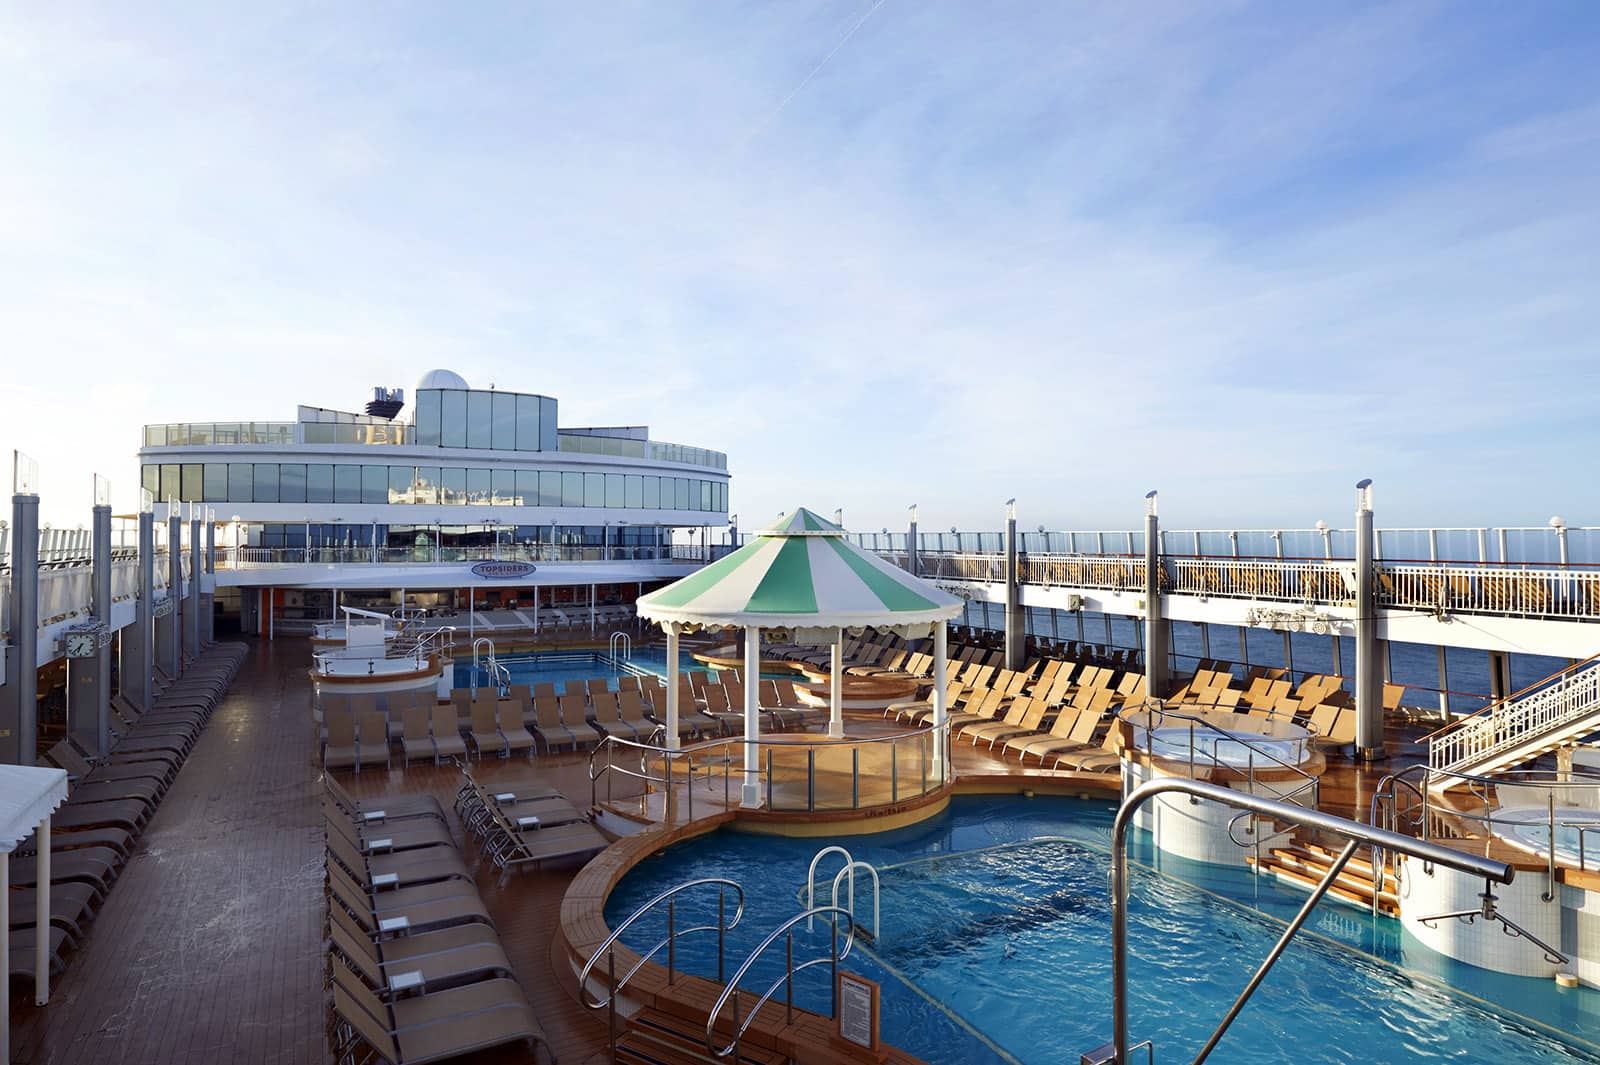 Norwegian Jewel Completes Bow-to-Stern Renovation